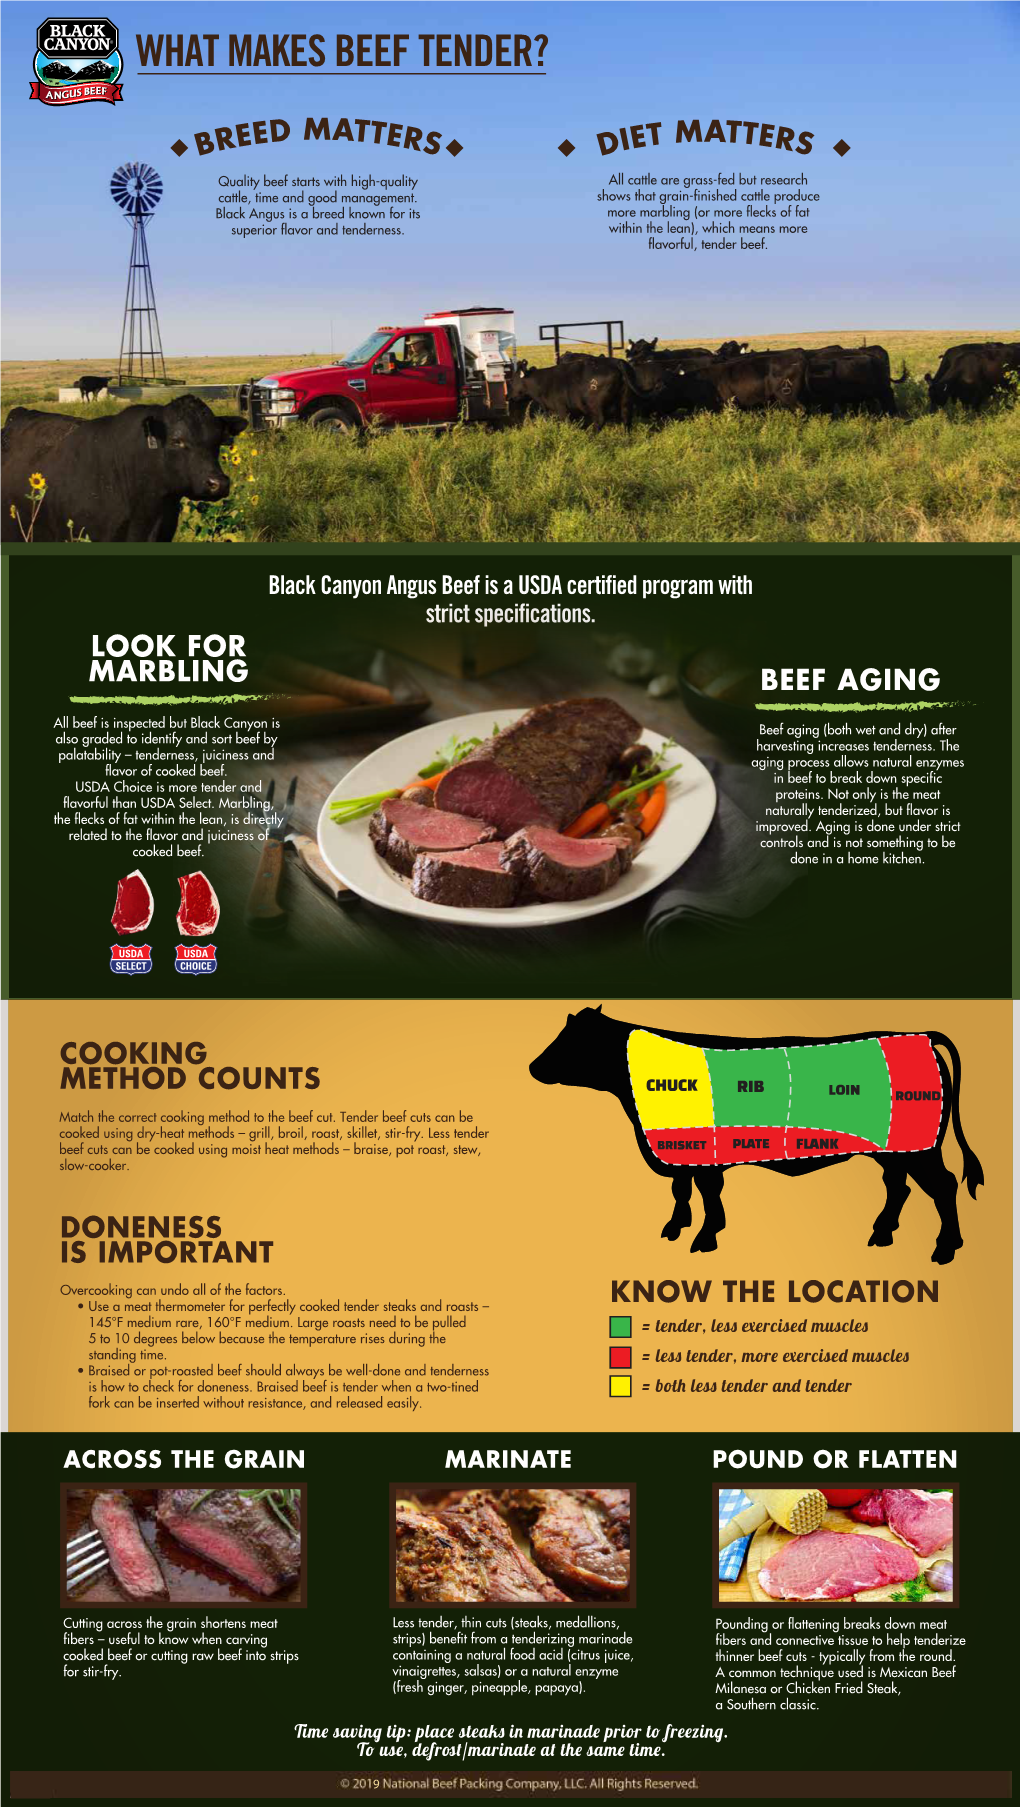 Beef Tenderness Find out Why Black Canyon